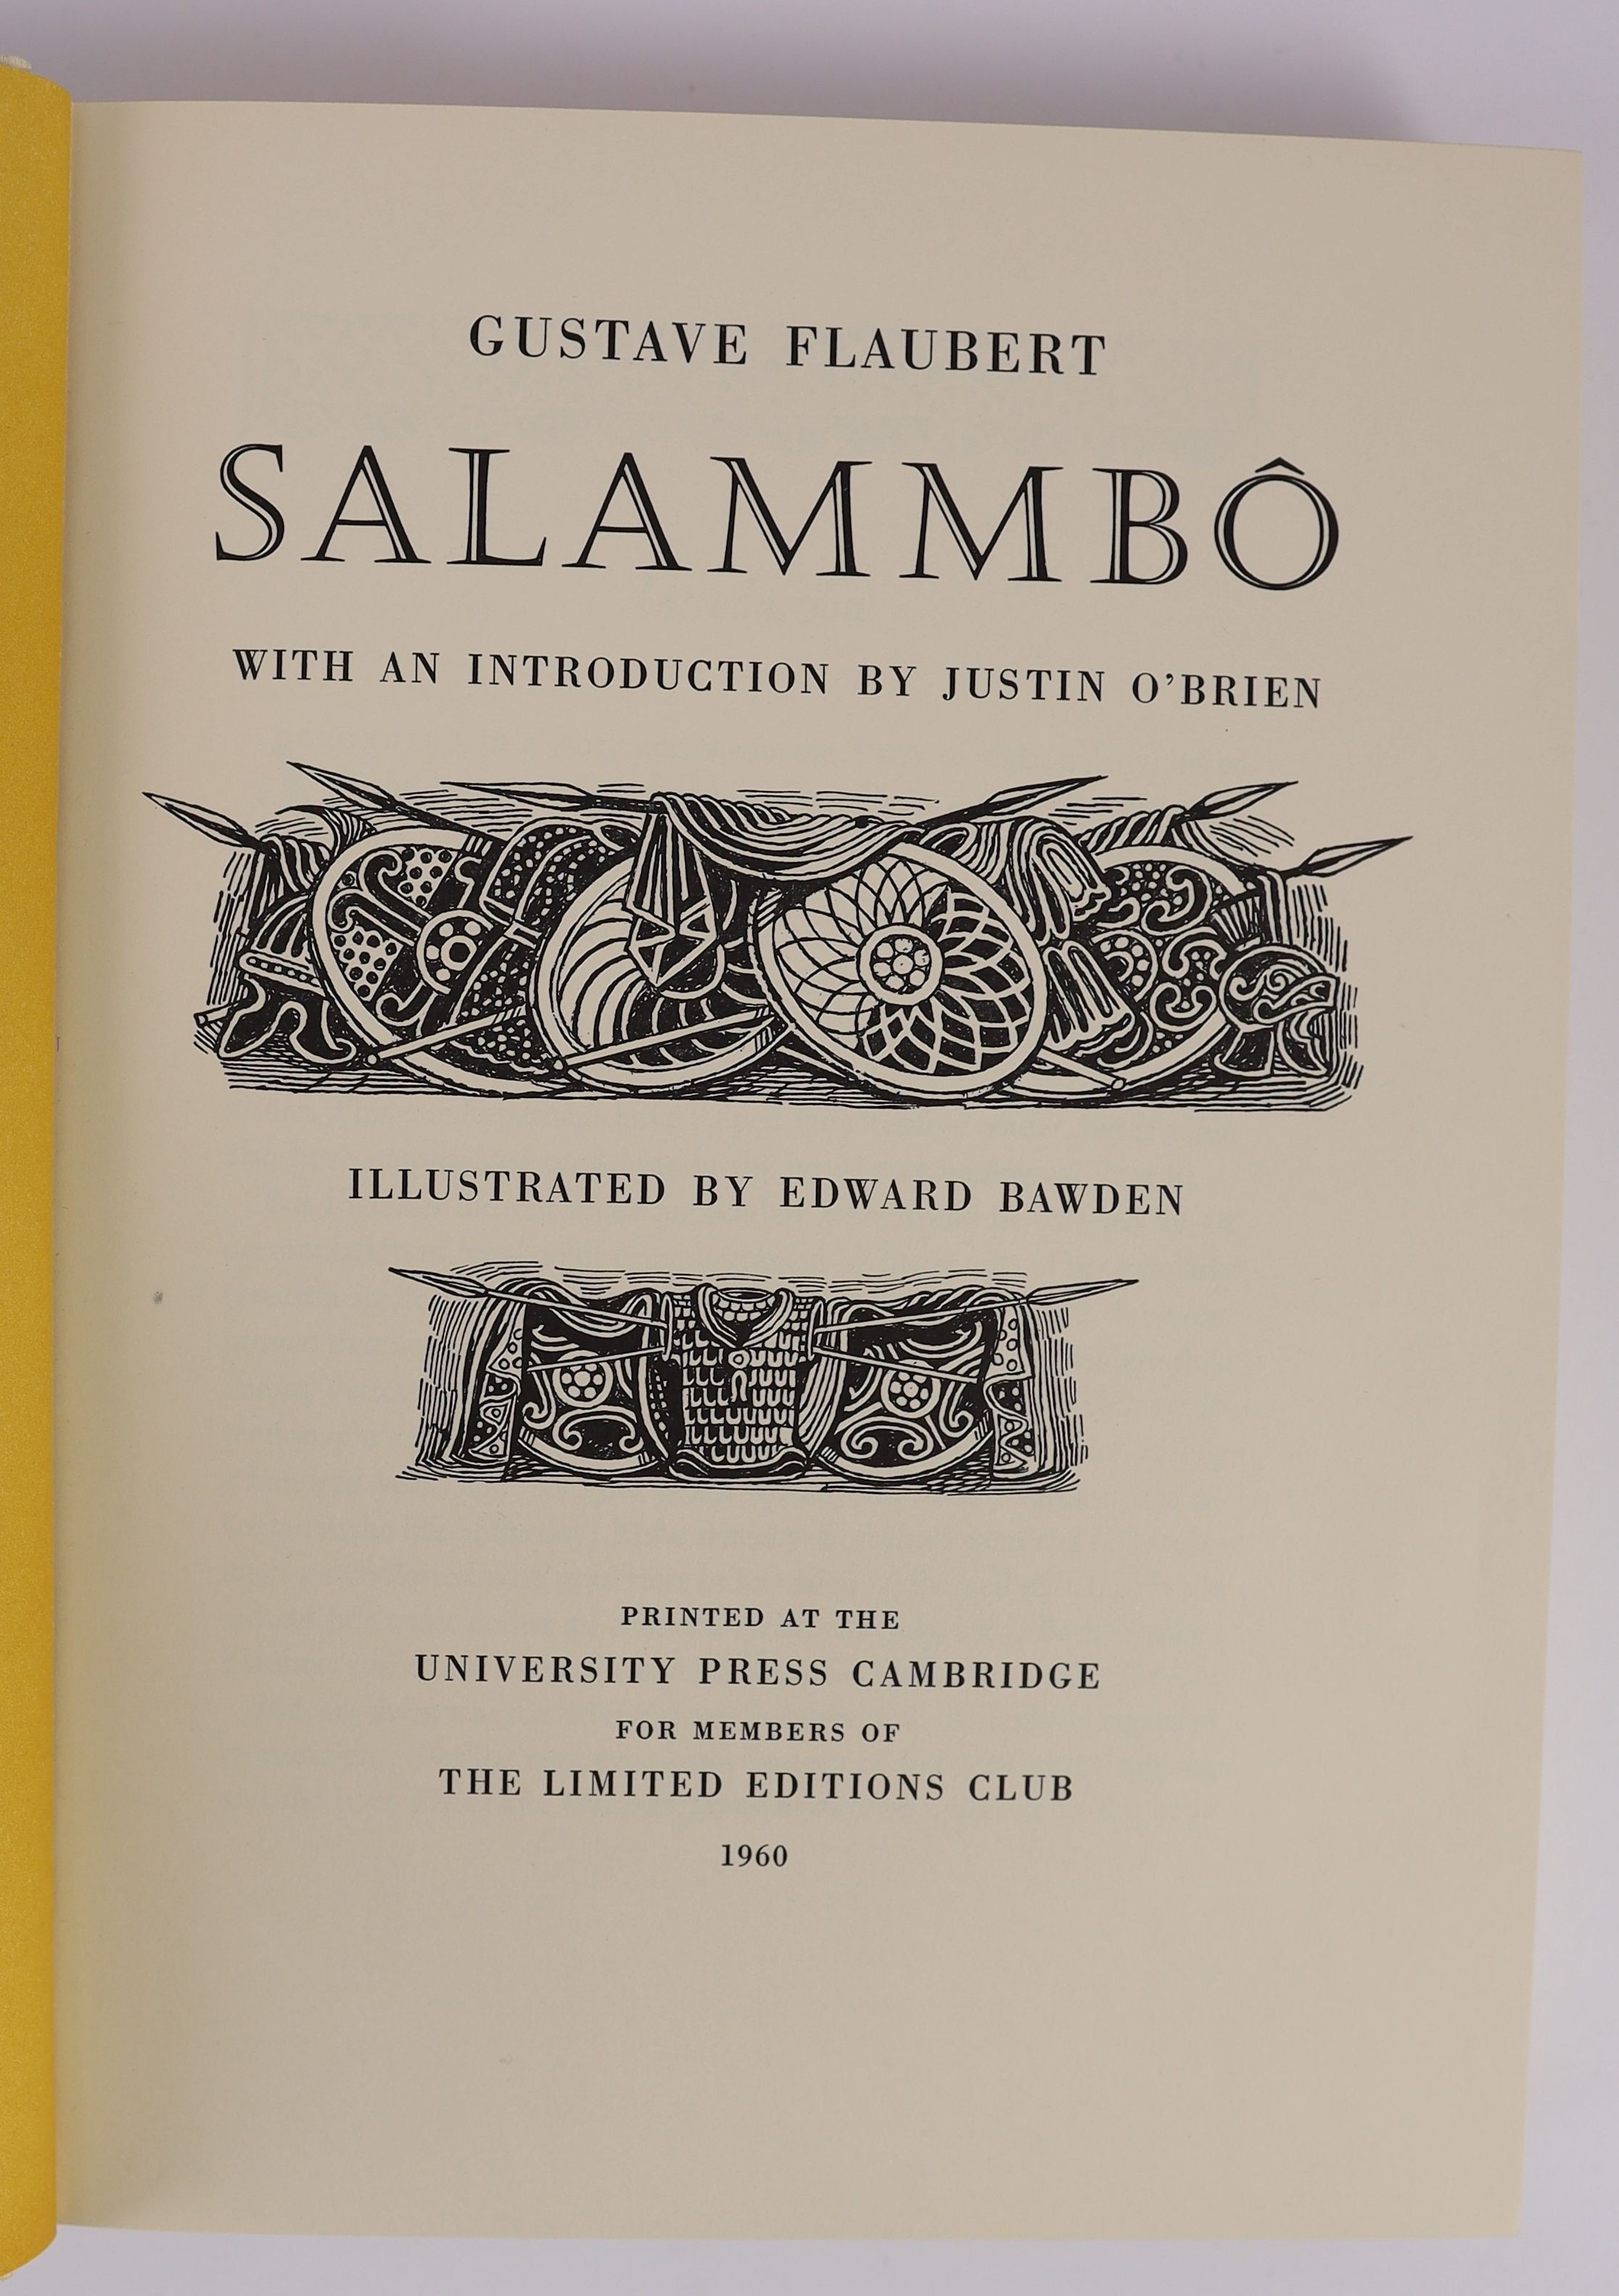 Flaubert, Gustavo - Salammbo, one of 1500, signed and illustrated by Edward Bawden with 8 double-page colour plates, 4to, ivory buckram, Limited Editions Club, Ipswich, 1960, with slip case.